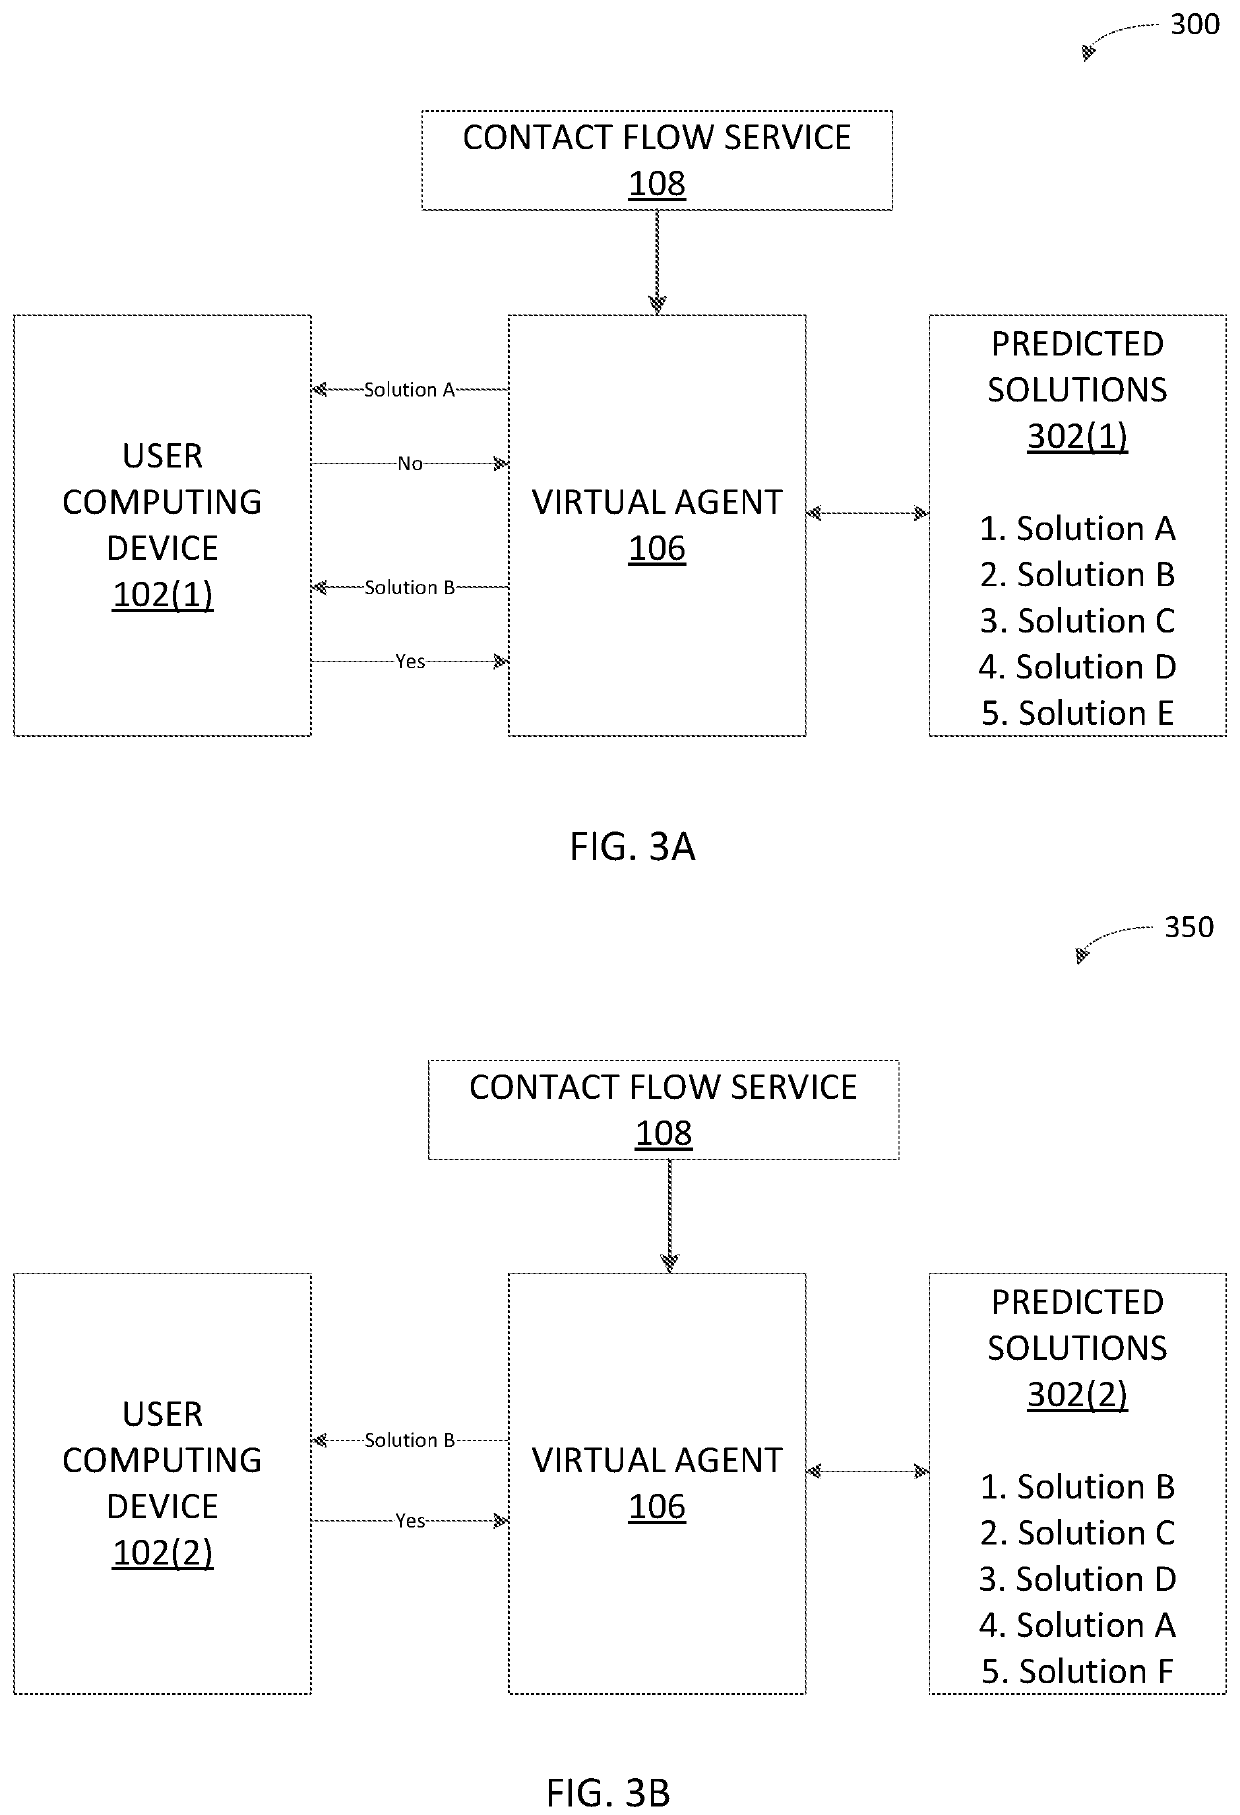 Automated self-service callback for proactive and dynamic user assistance